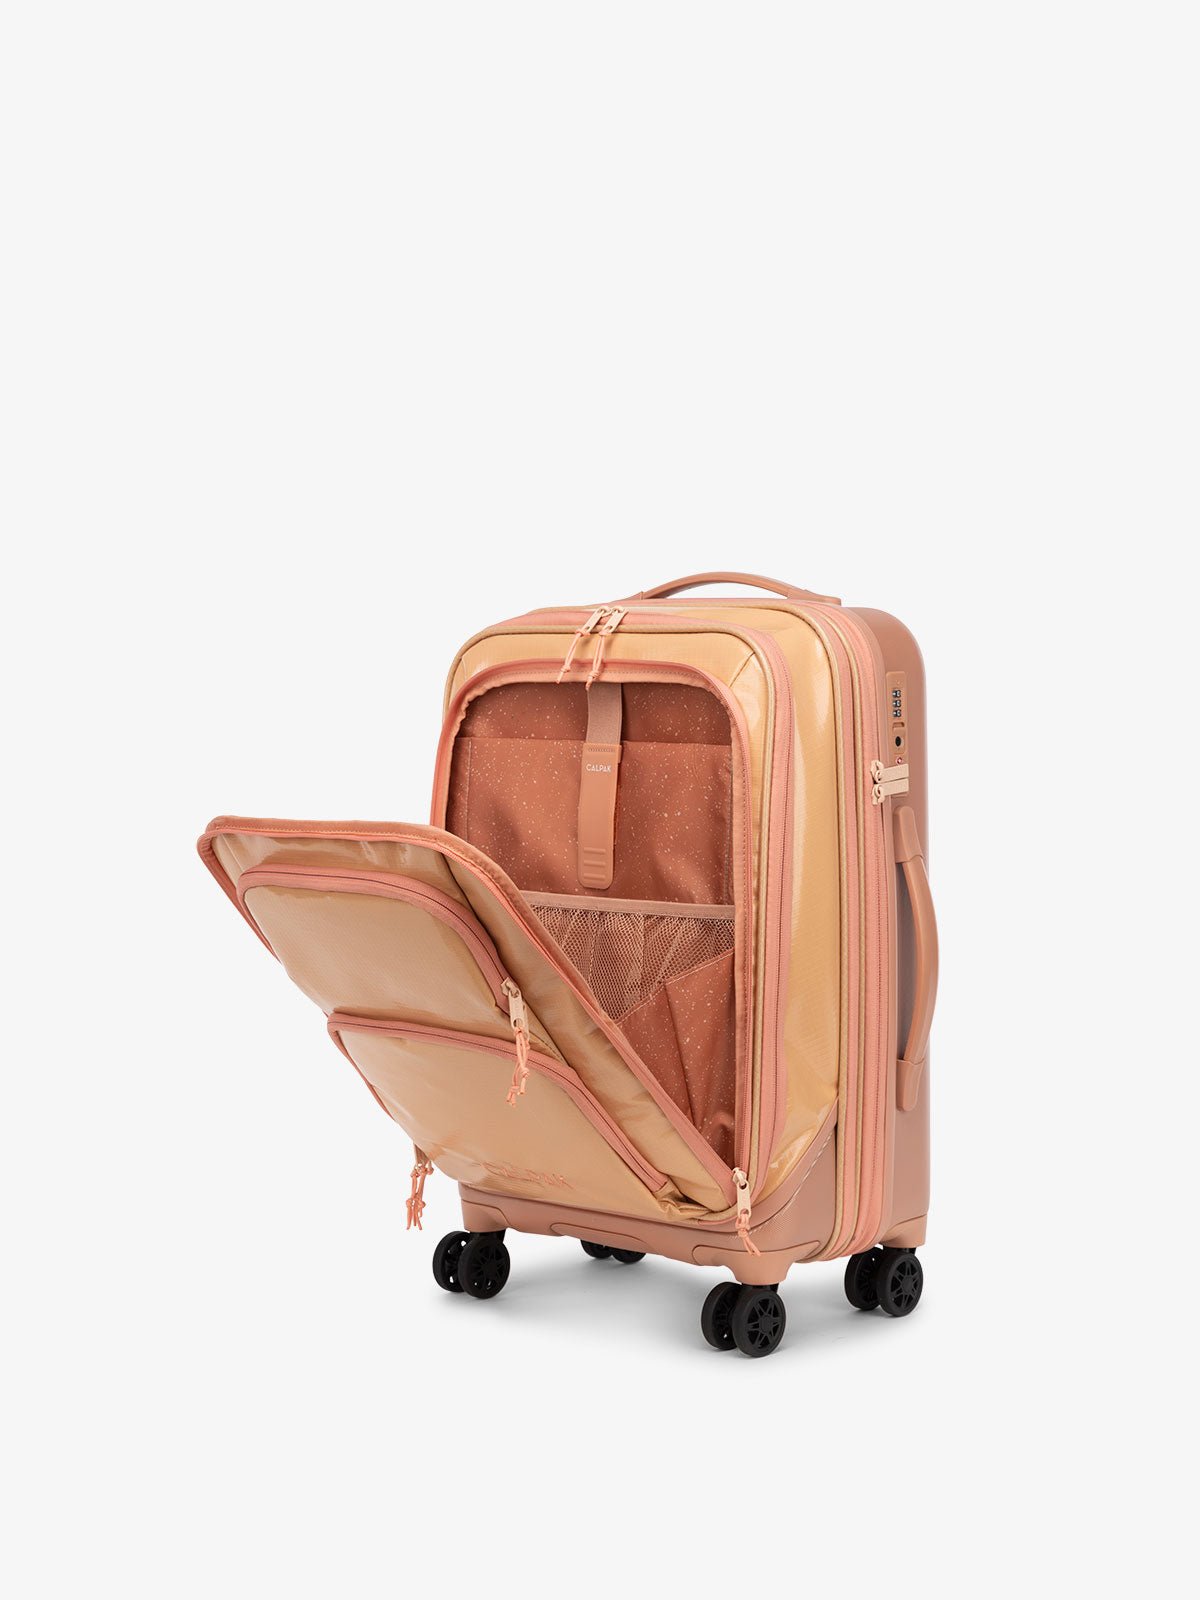 CALPAK Terra Carry-On Luggage with padded laptop compartment and 360 spinner wheels in canyon